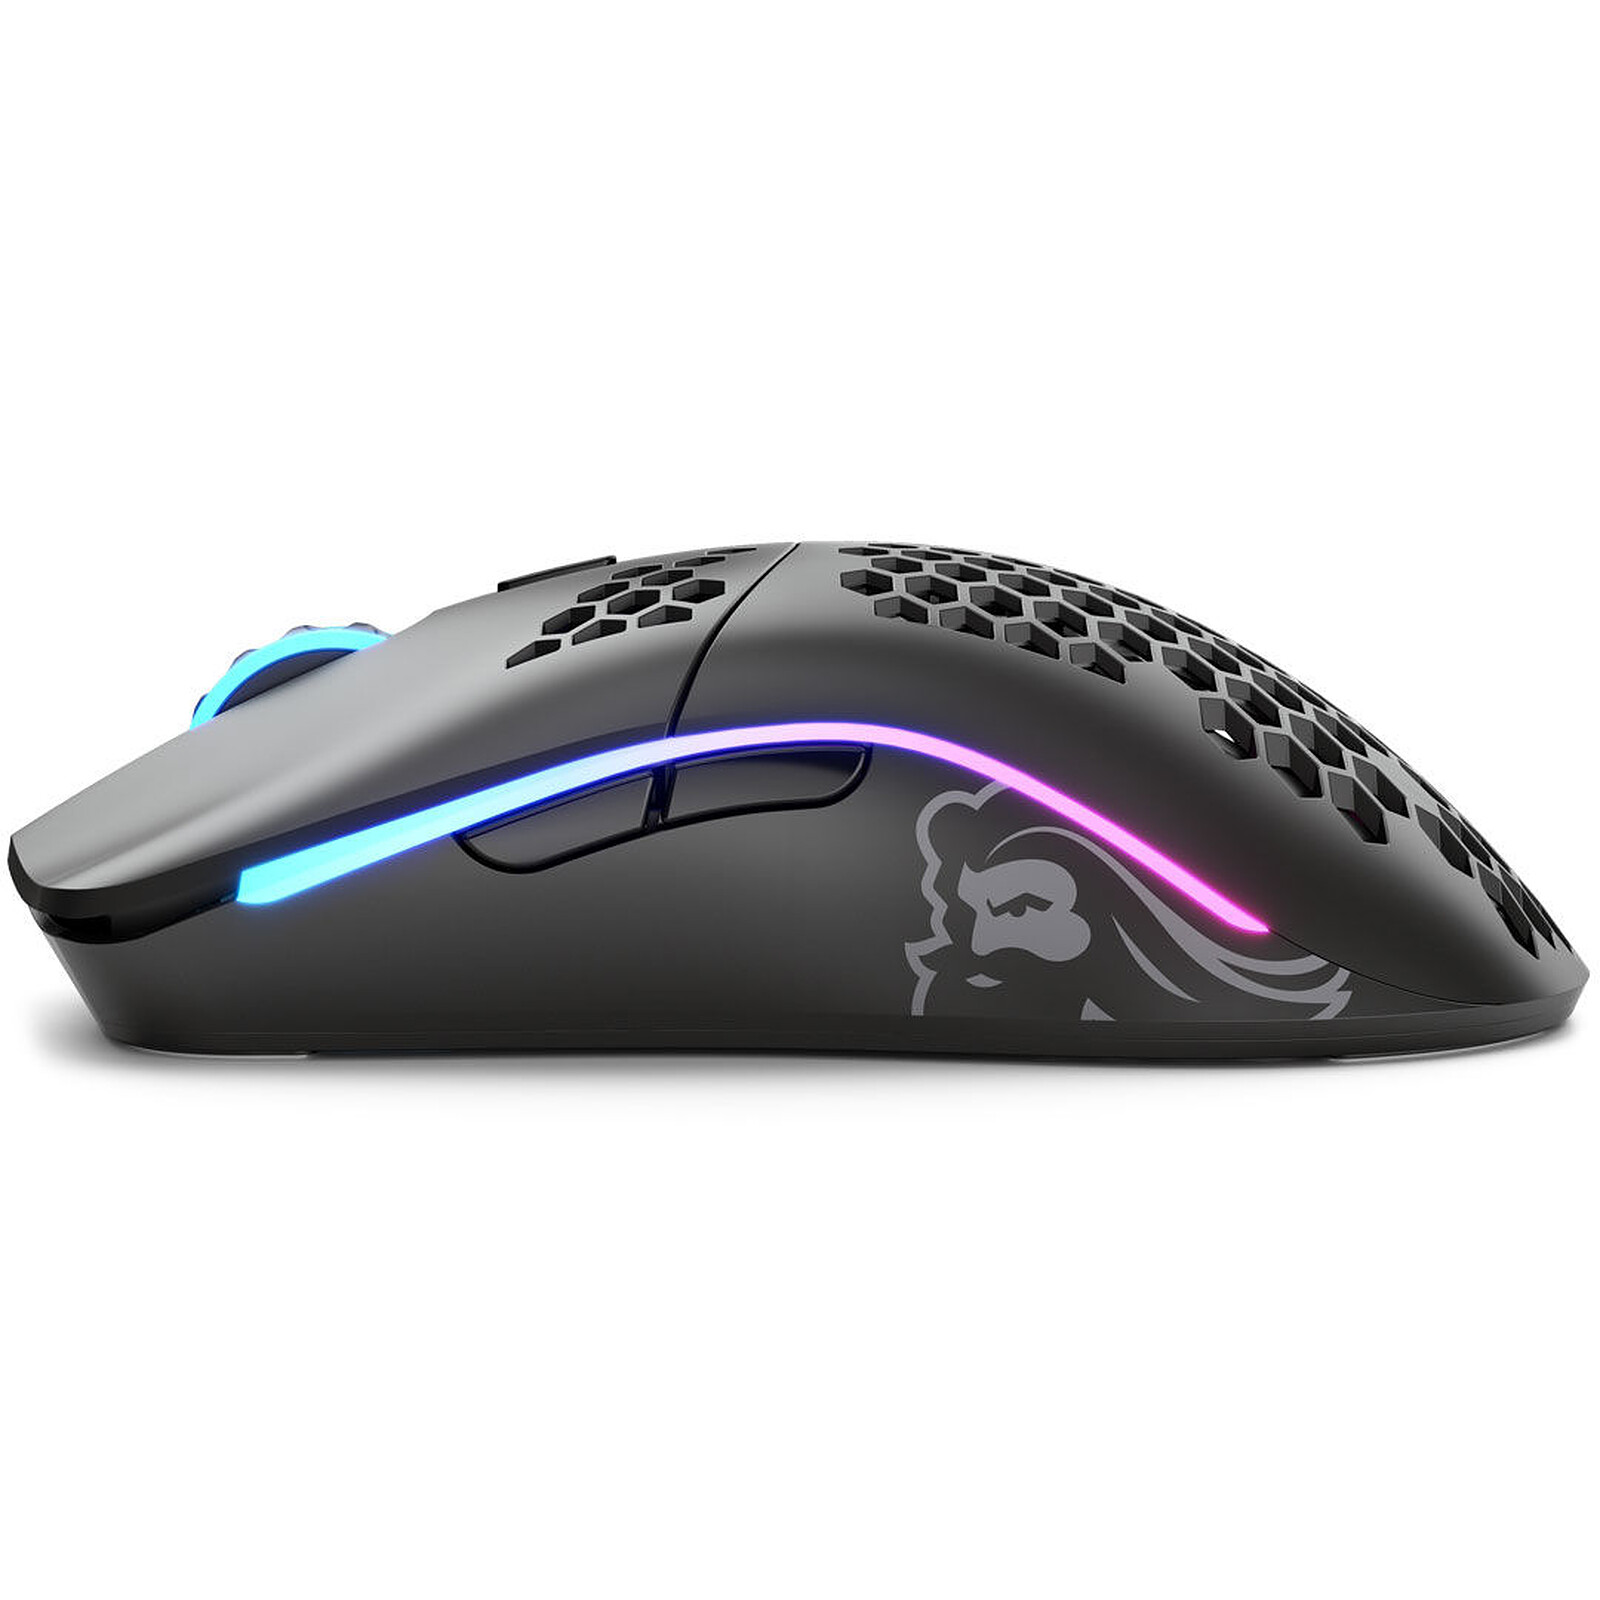 Glorious Model O Wireless Black Mouse Glorious Pc Gaming Race On Ldlc